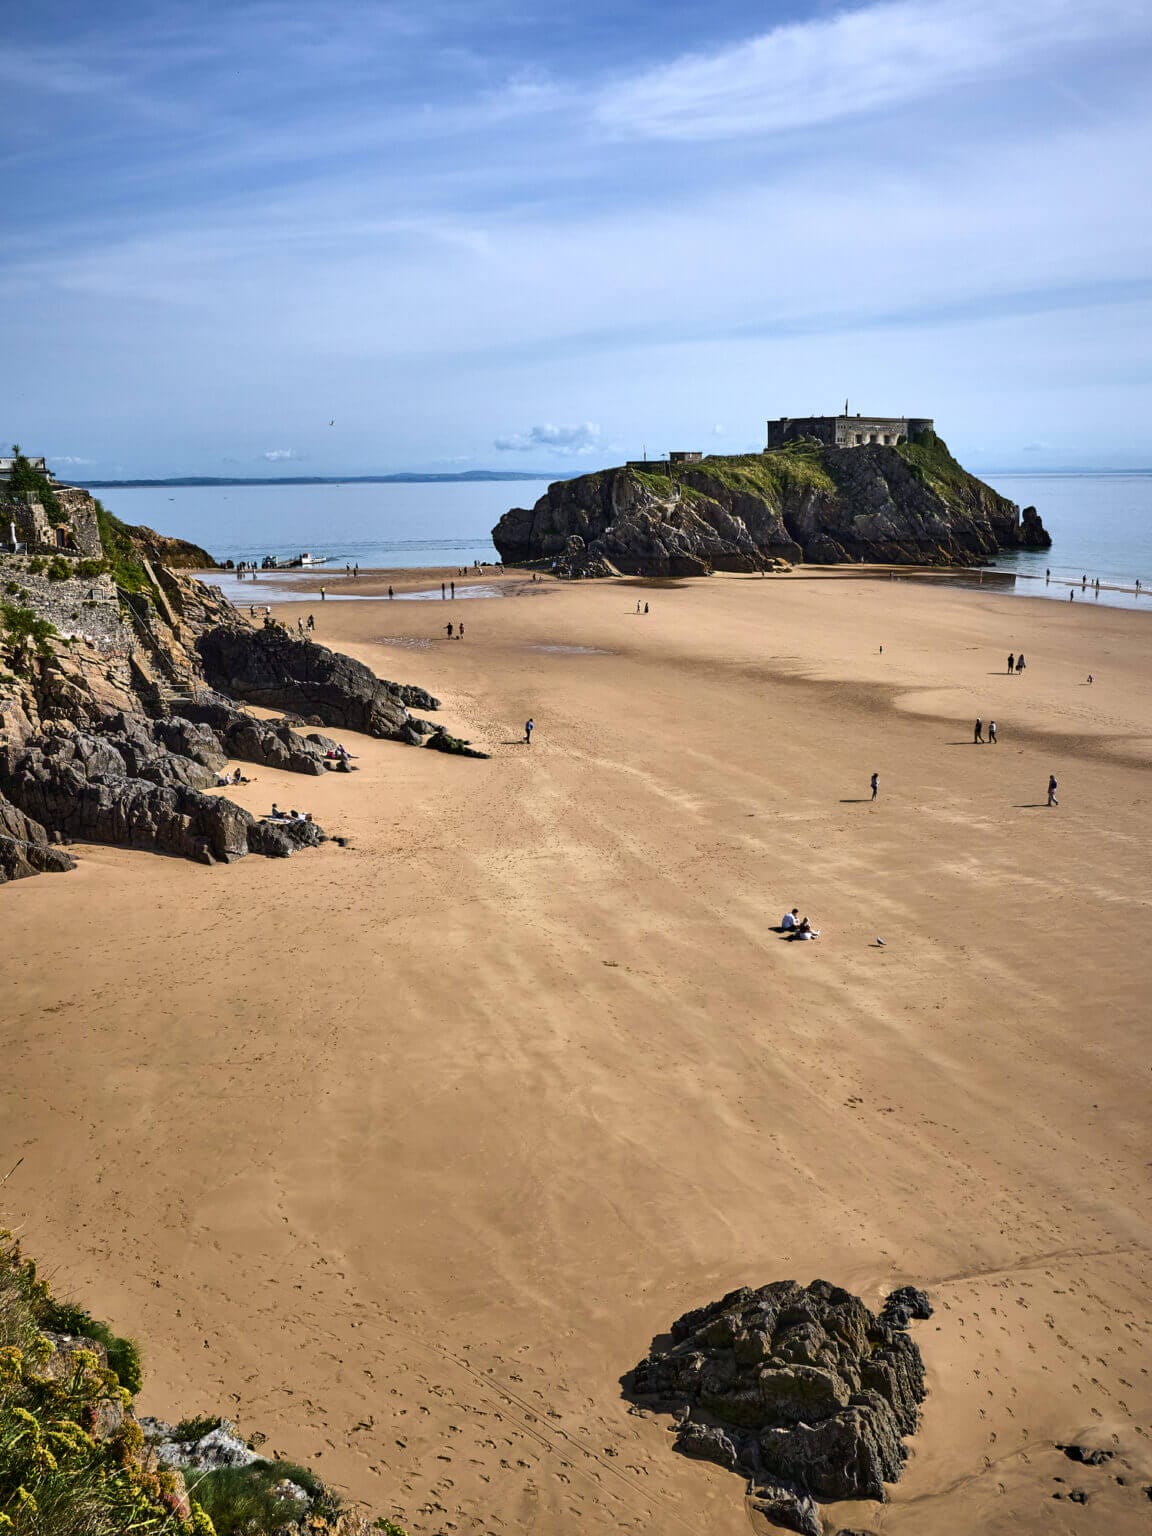 The Best Things to Do in Tenby Wales - Alison Fay